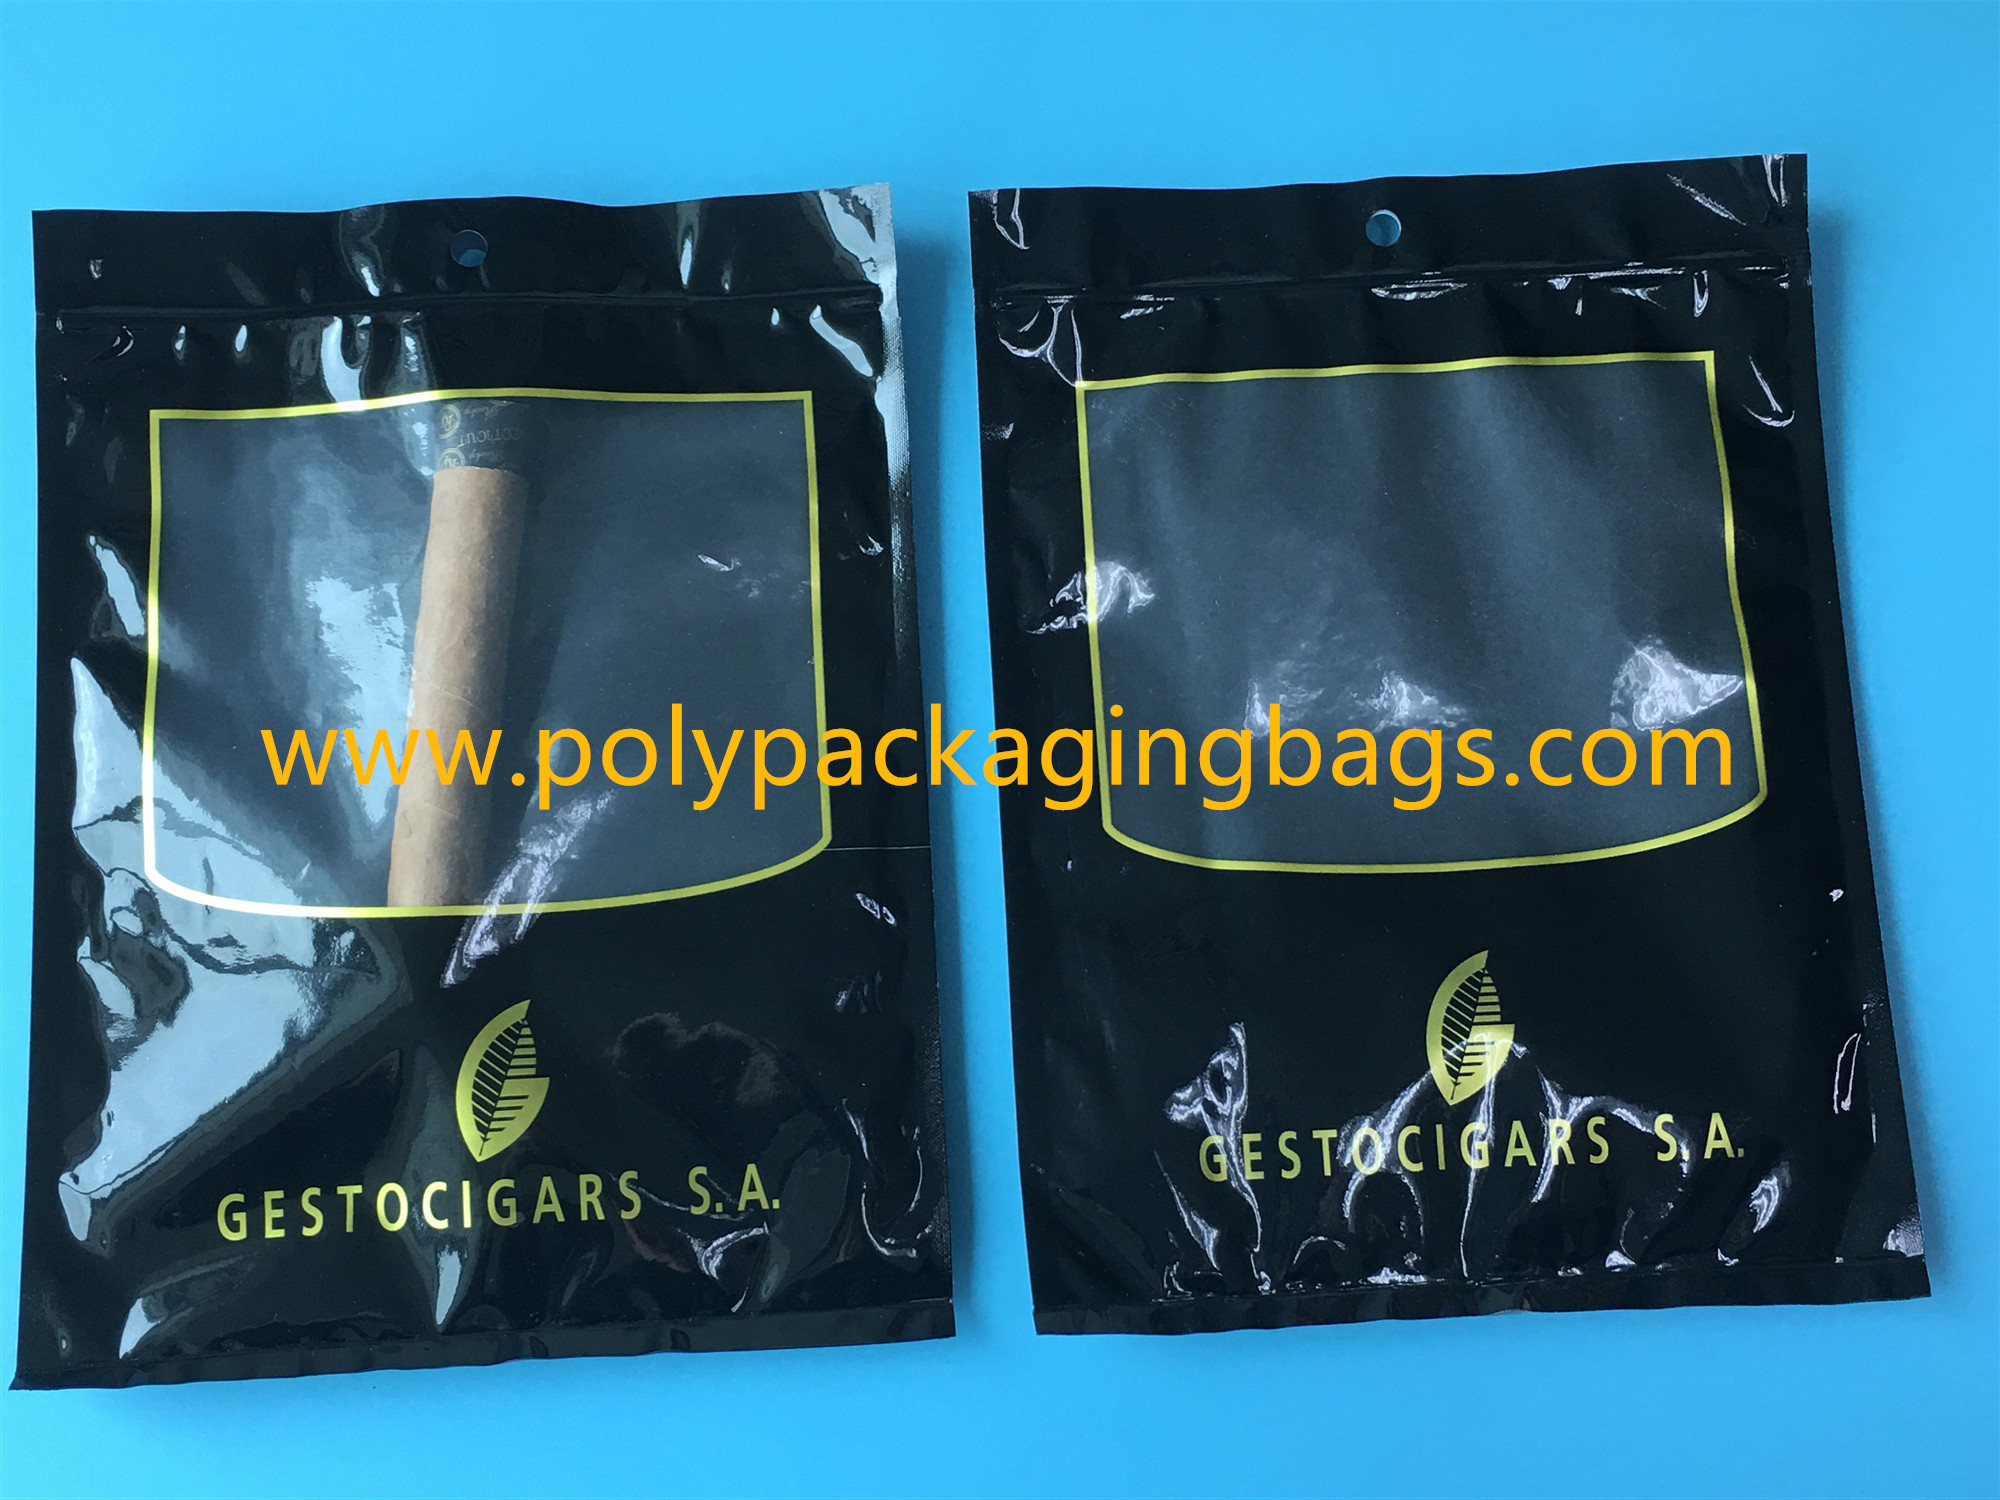 China SGS Black Moisturizing Bag Can Hold  4-6 / Cigar Bags With Transparent Window on sale